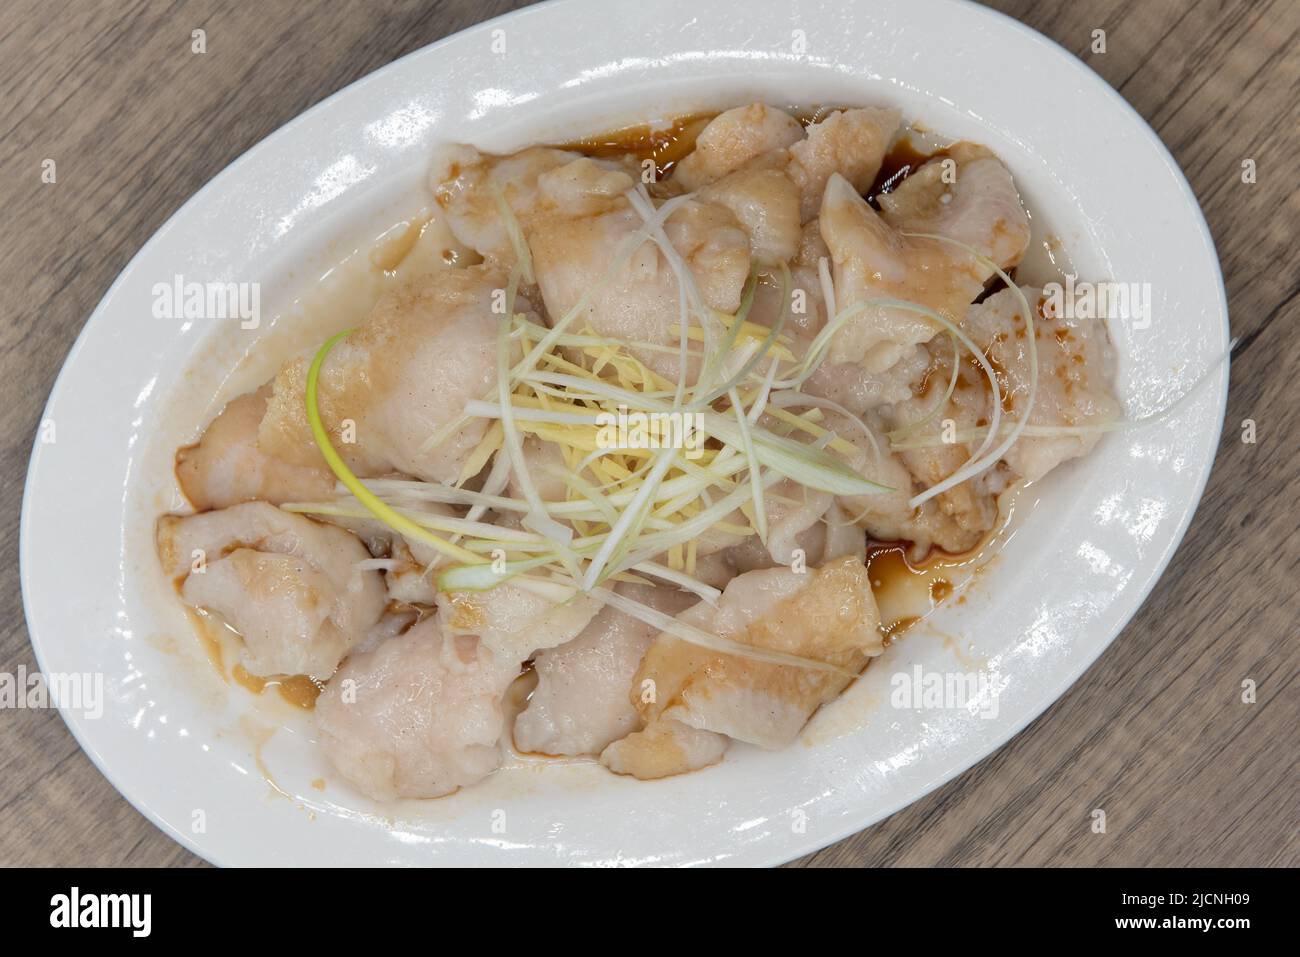 Overhead view of steamed fish fillets in ginger sauce and piled high on the plate for a great Chinese food meal. Stock Photo